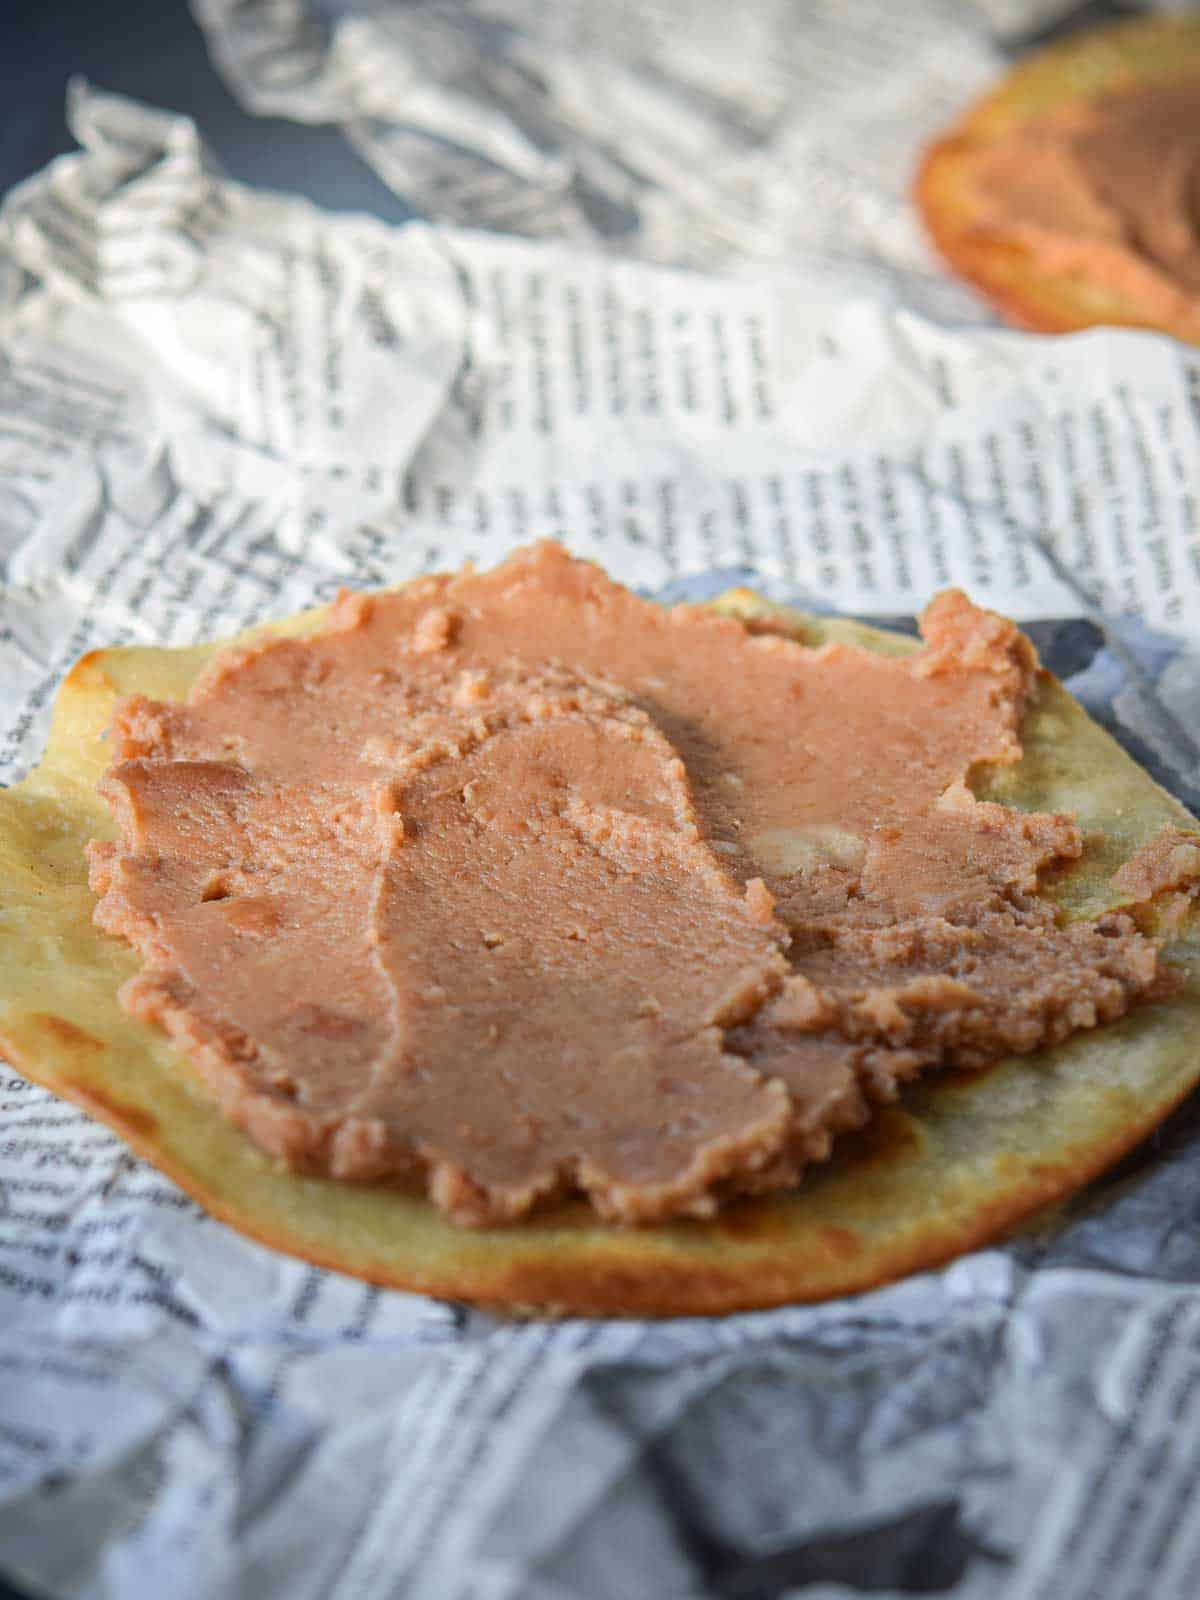 Fried tortilla with refried beans spread on top of it.